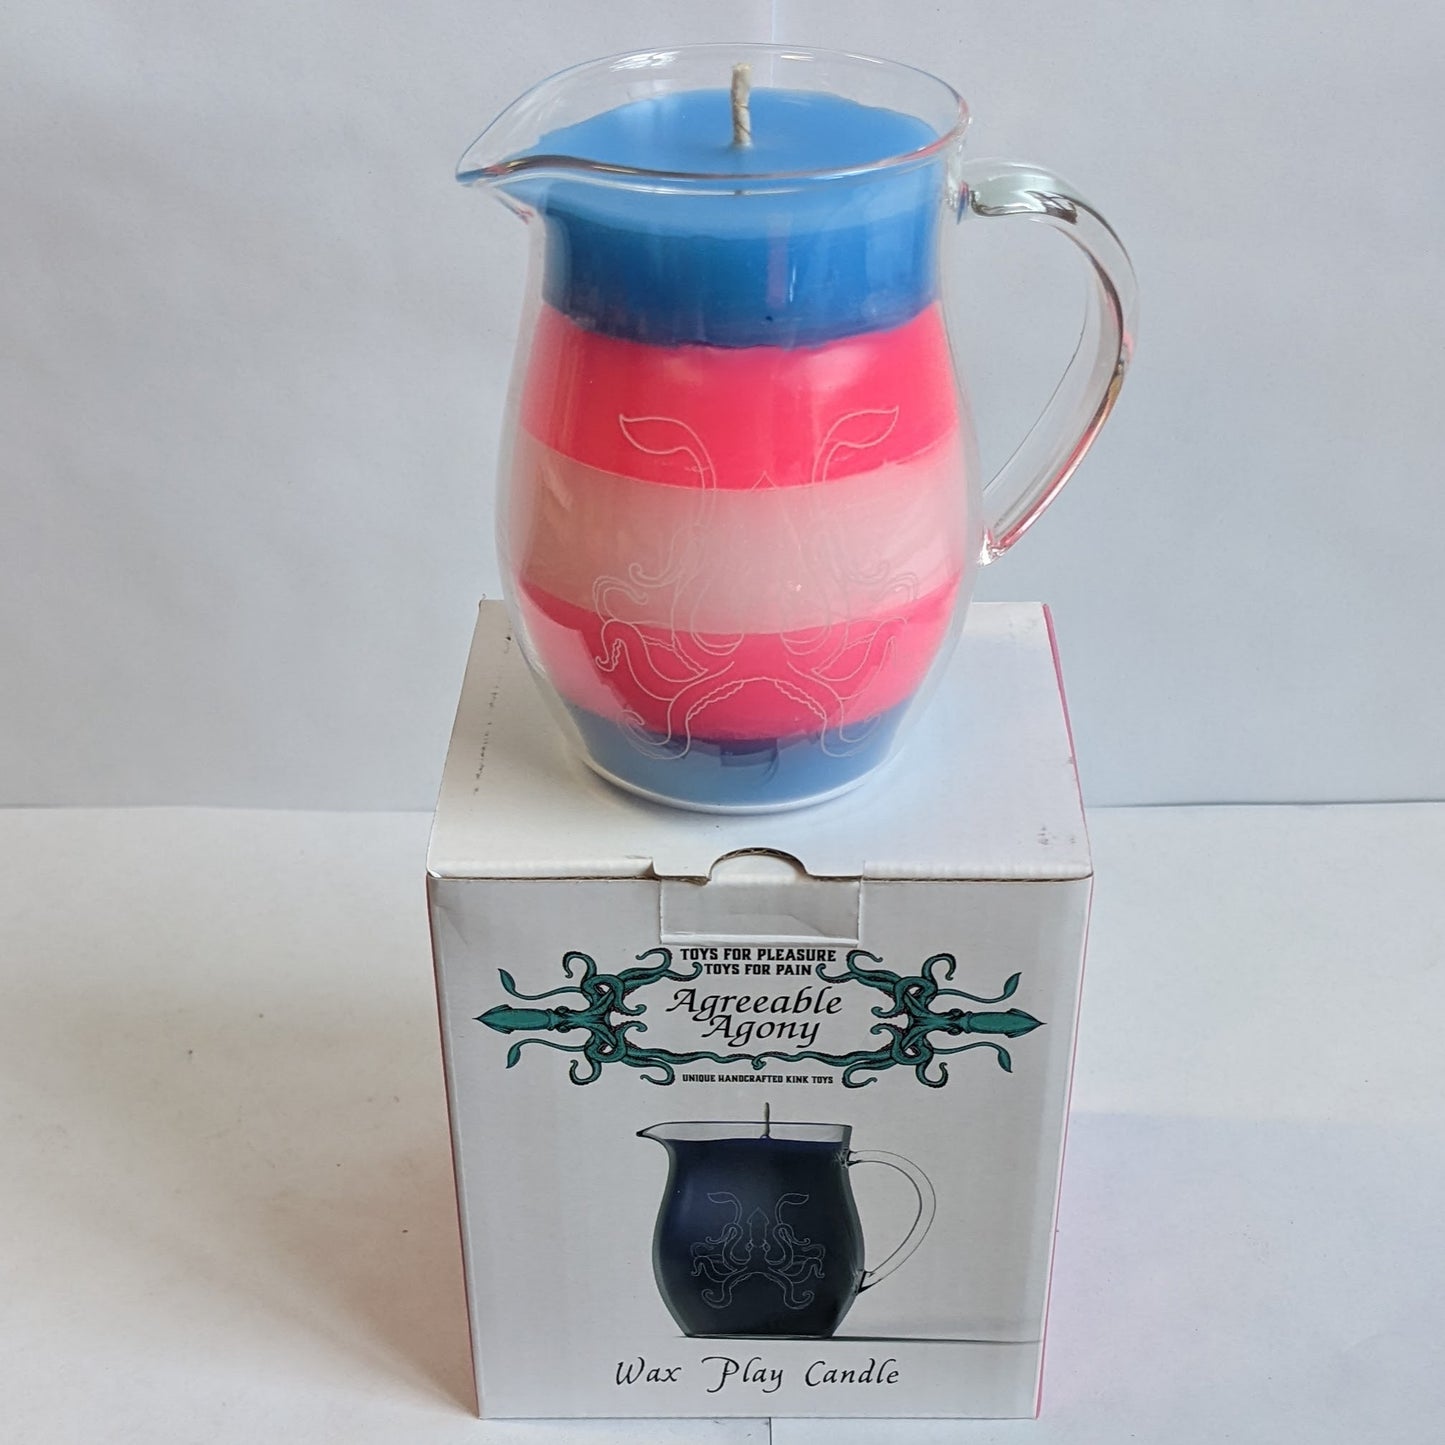 Pride flag in a Jar Wax Play Candle - Low Temp - Unscented - Pitcher Candle